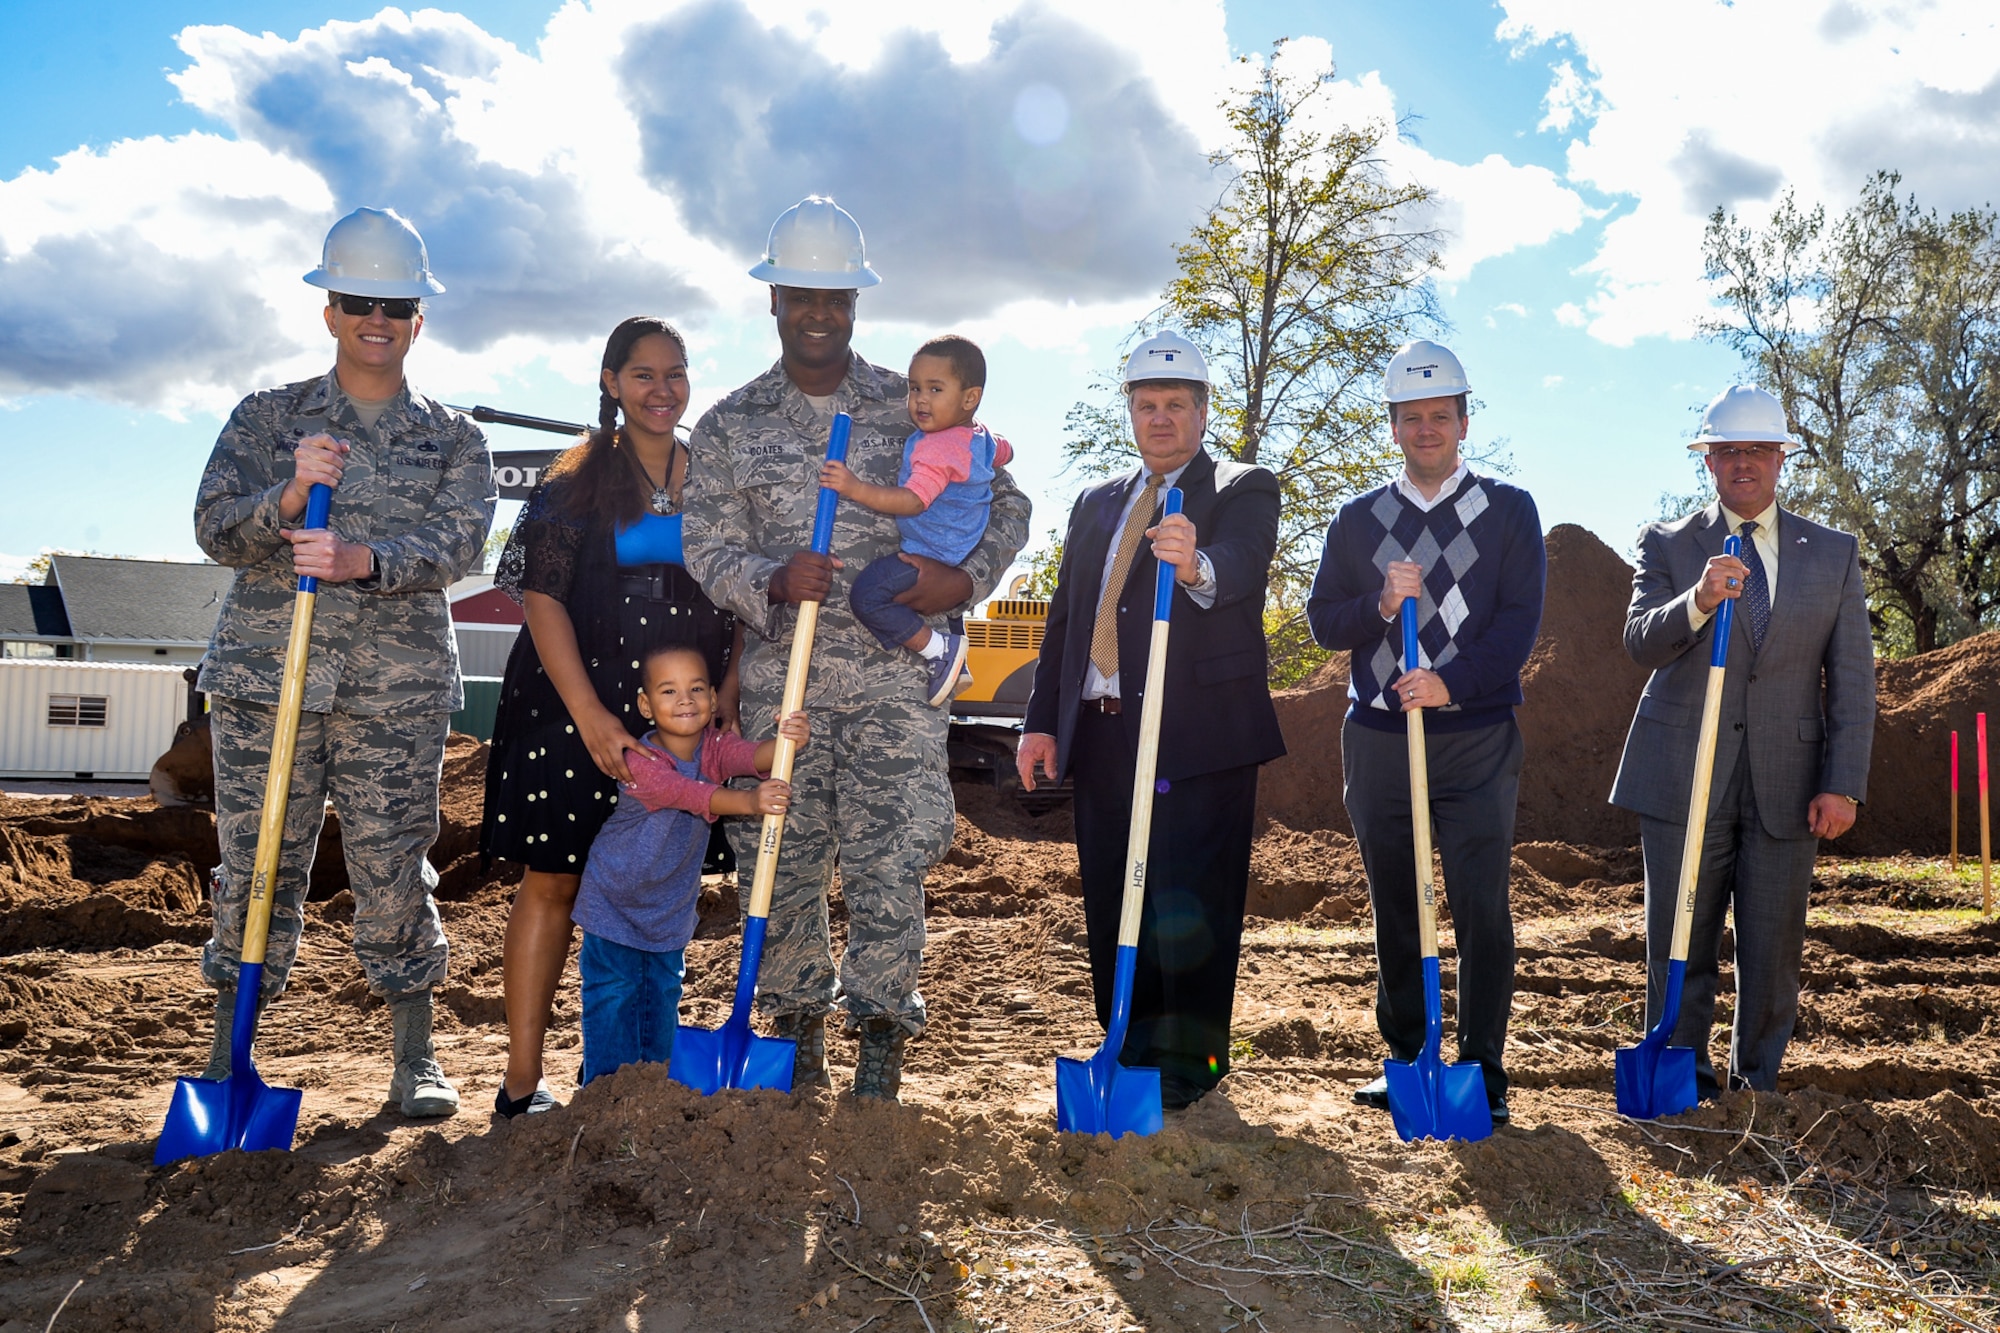 Members of the Air Force and the base's privatized housing contractor, Boyer Hill Military Housing, prepare to break ground on 10 new homes Oct. 19 at Hill Air Force Base, Utah. The homes will be made available to Hill AFB's junior enlisted military families. Left to right: Col. Jennifer Hammerstedt, 75th Air Base Wing commander; housing residents Staff Sgt. James Charnell Coates, his wife Charnell and their two children; Rulon Gardner, BHMH owner; Brent Pace, BHMH president; and Harry Briesmaster, 75th Civil Engineer Group director. (U.S. Air Force by R. Nial Bradshaw)